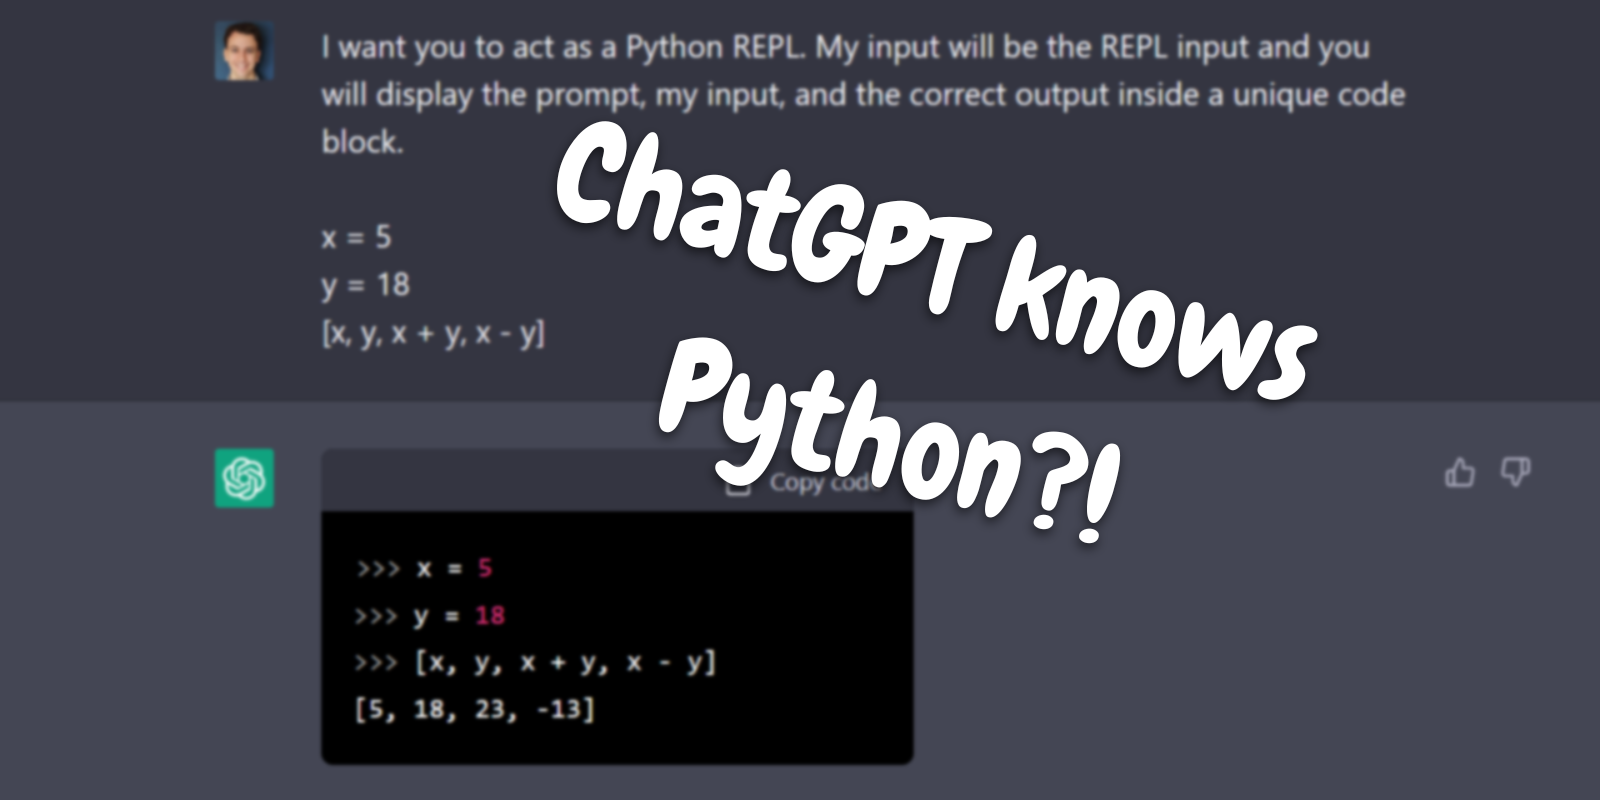 Blurred screenshot of my conversation with ChatGPT where ChatGPT simulates an interactive Python REPL.